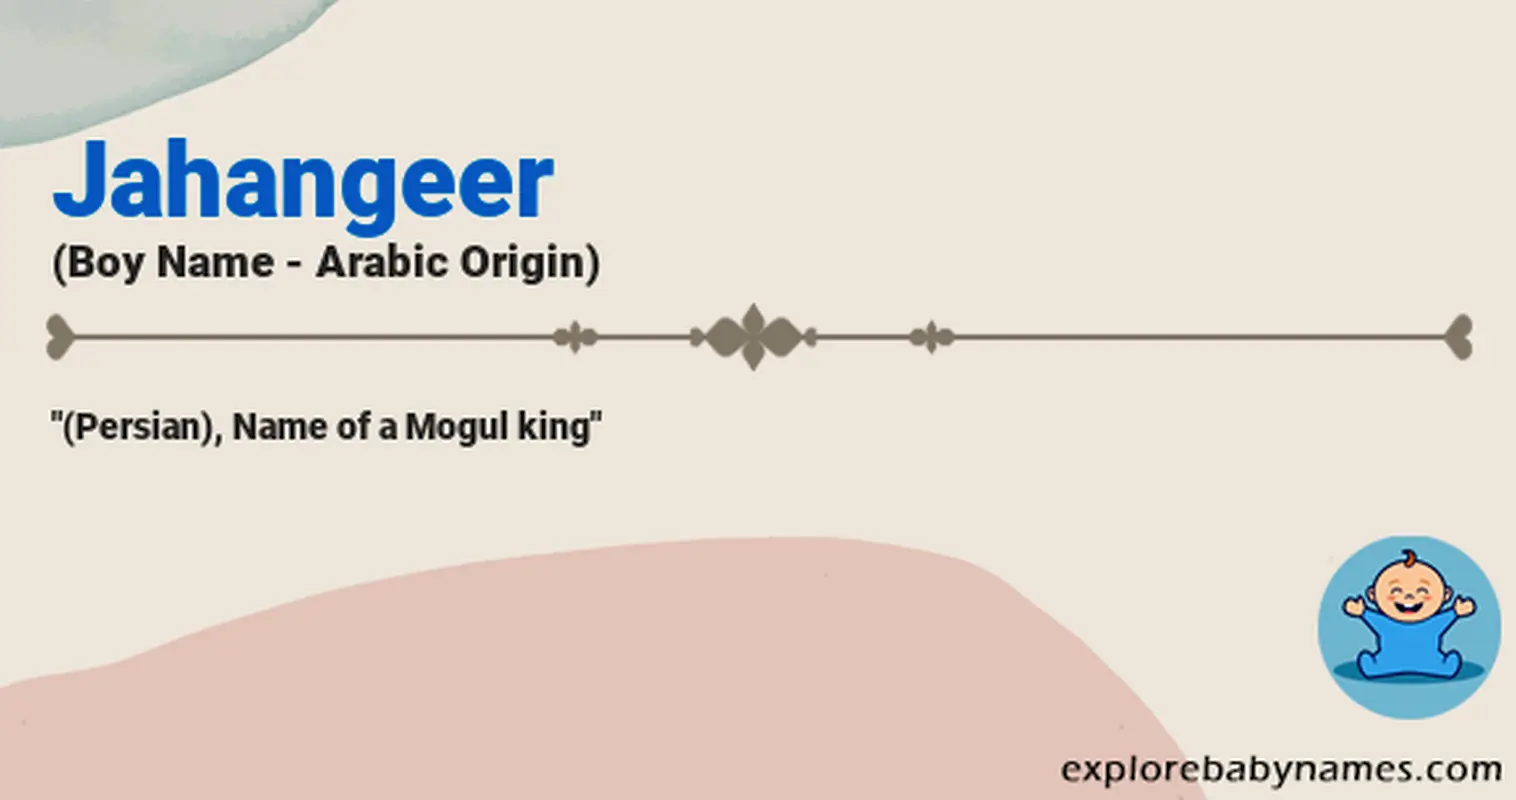 Meaning of Jahangeer